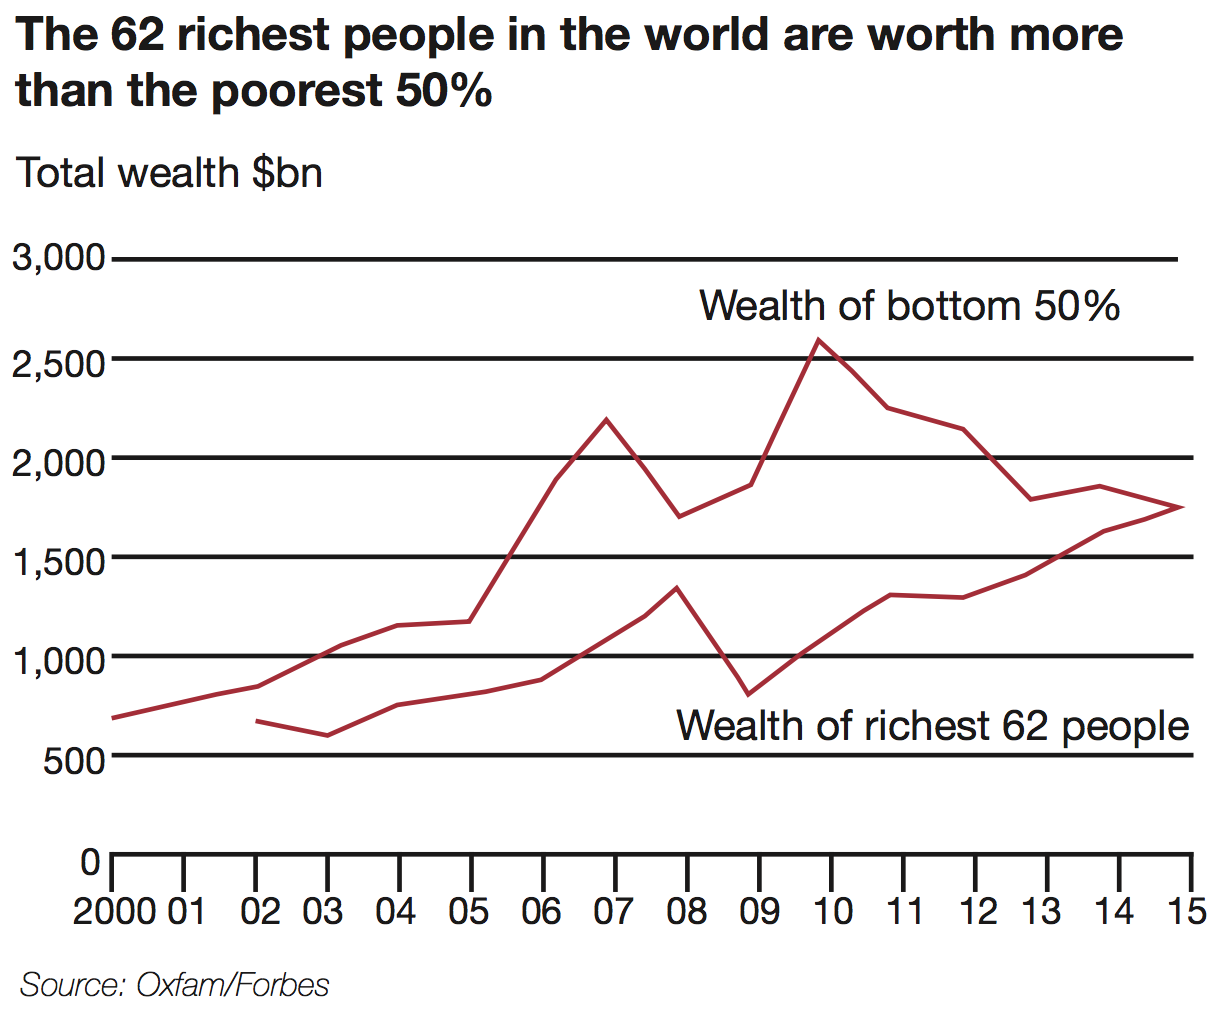 The 62 richest people in the world are worth more than the poorest 50% Wealth of bottom 50% vs Wealth of richest 62 people